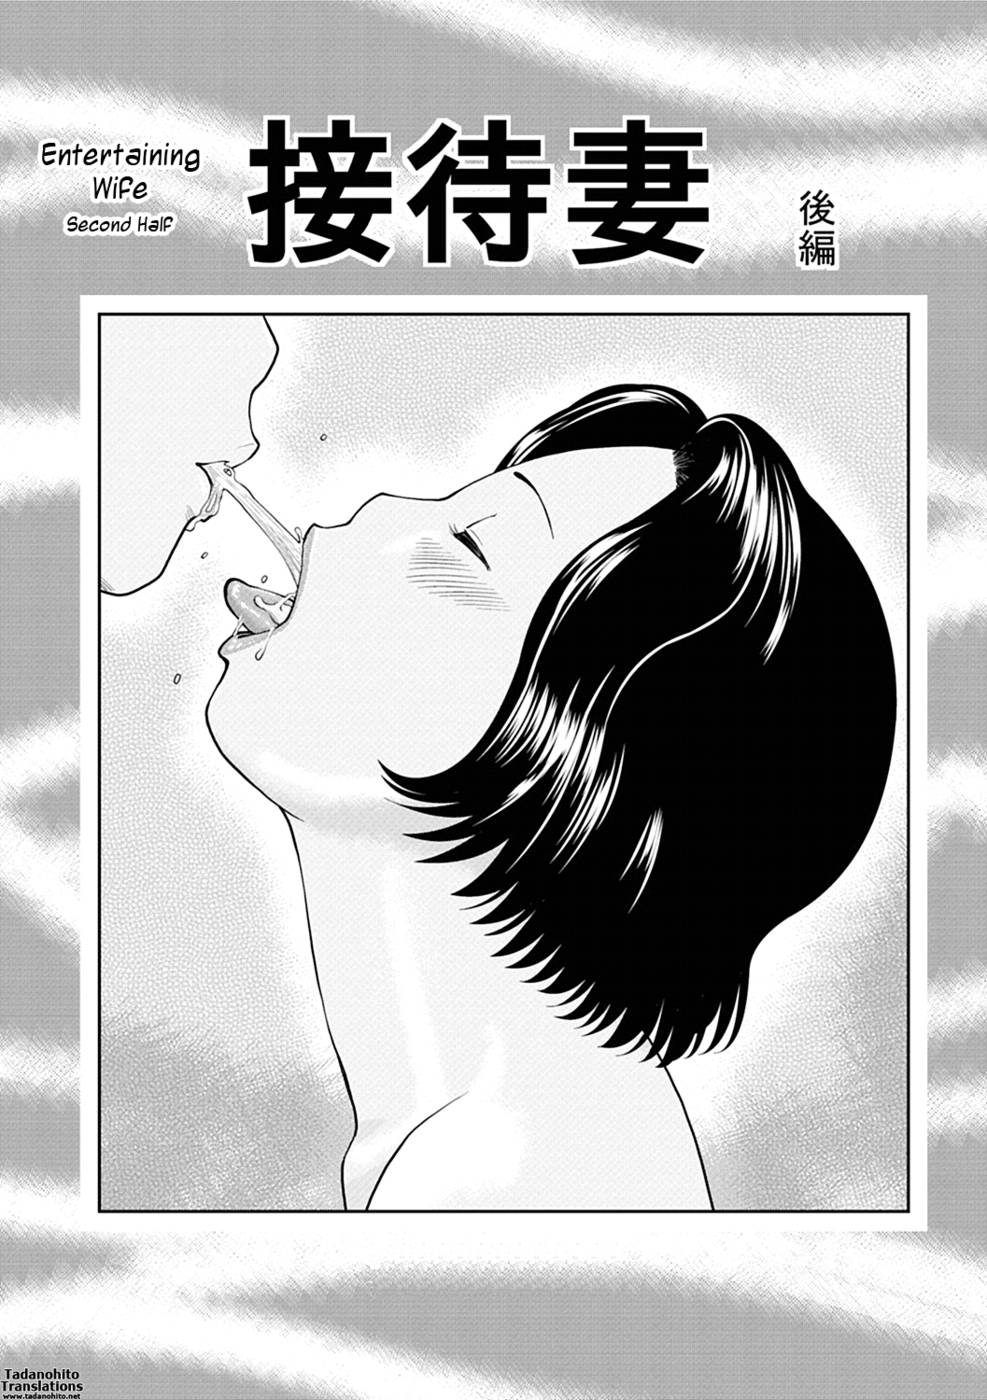 Hentai Manga Comic-34 Year Old Unsatisfied Wife-Chapter 4-Entertaining Wife-Second Half-1